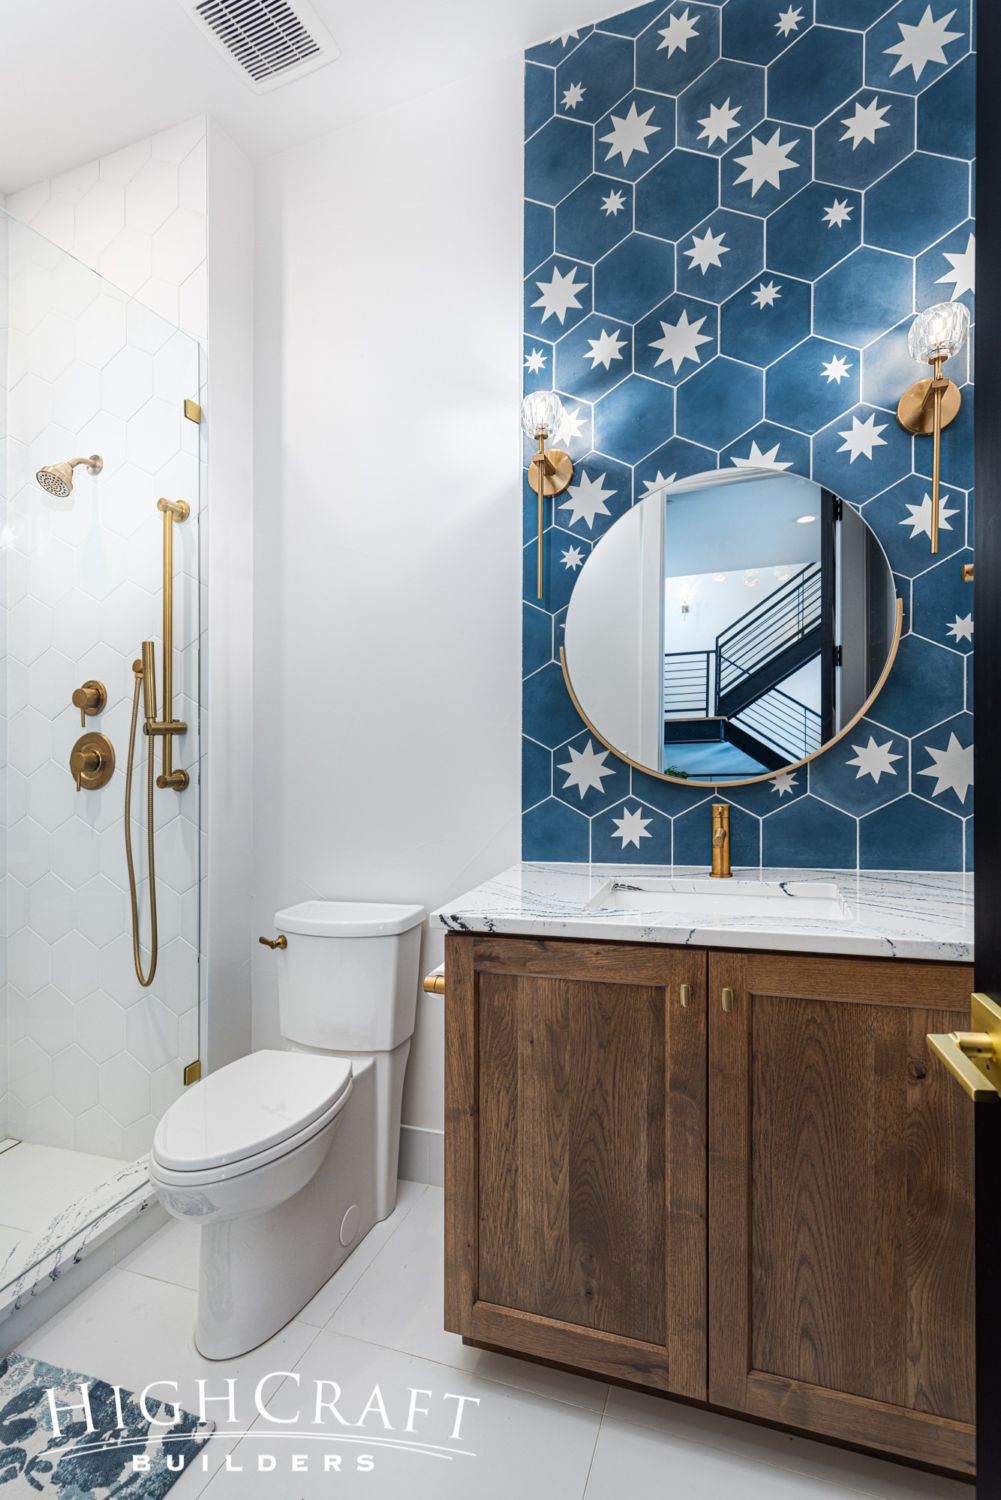 whole-house-remodel-guest-bathroom-star-tiles